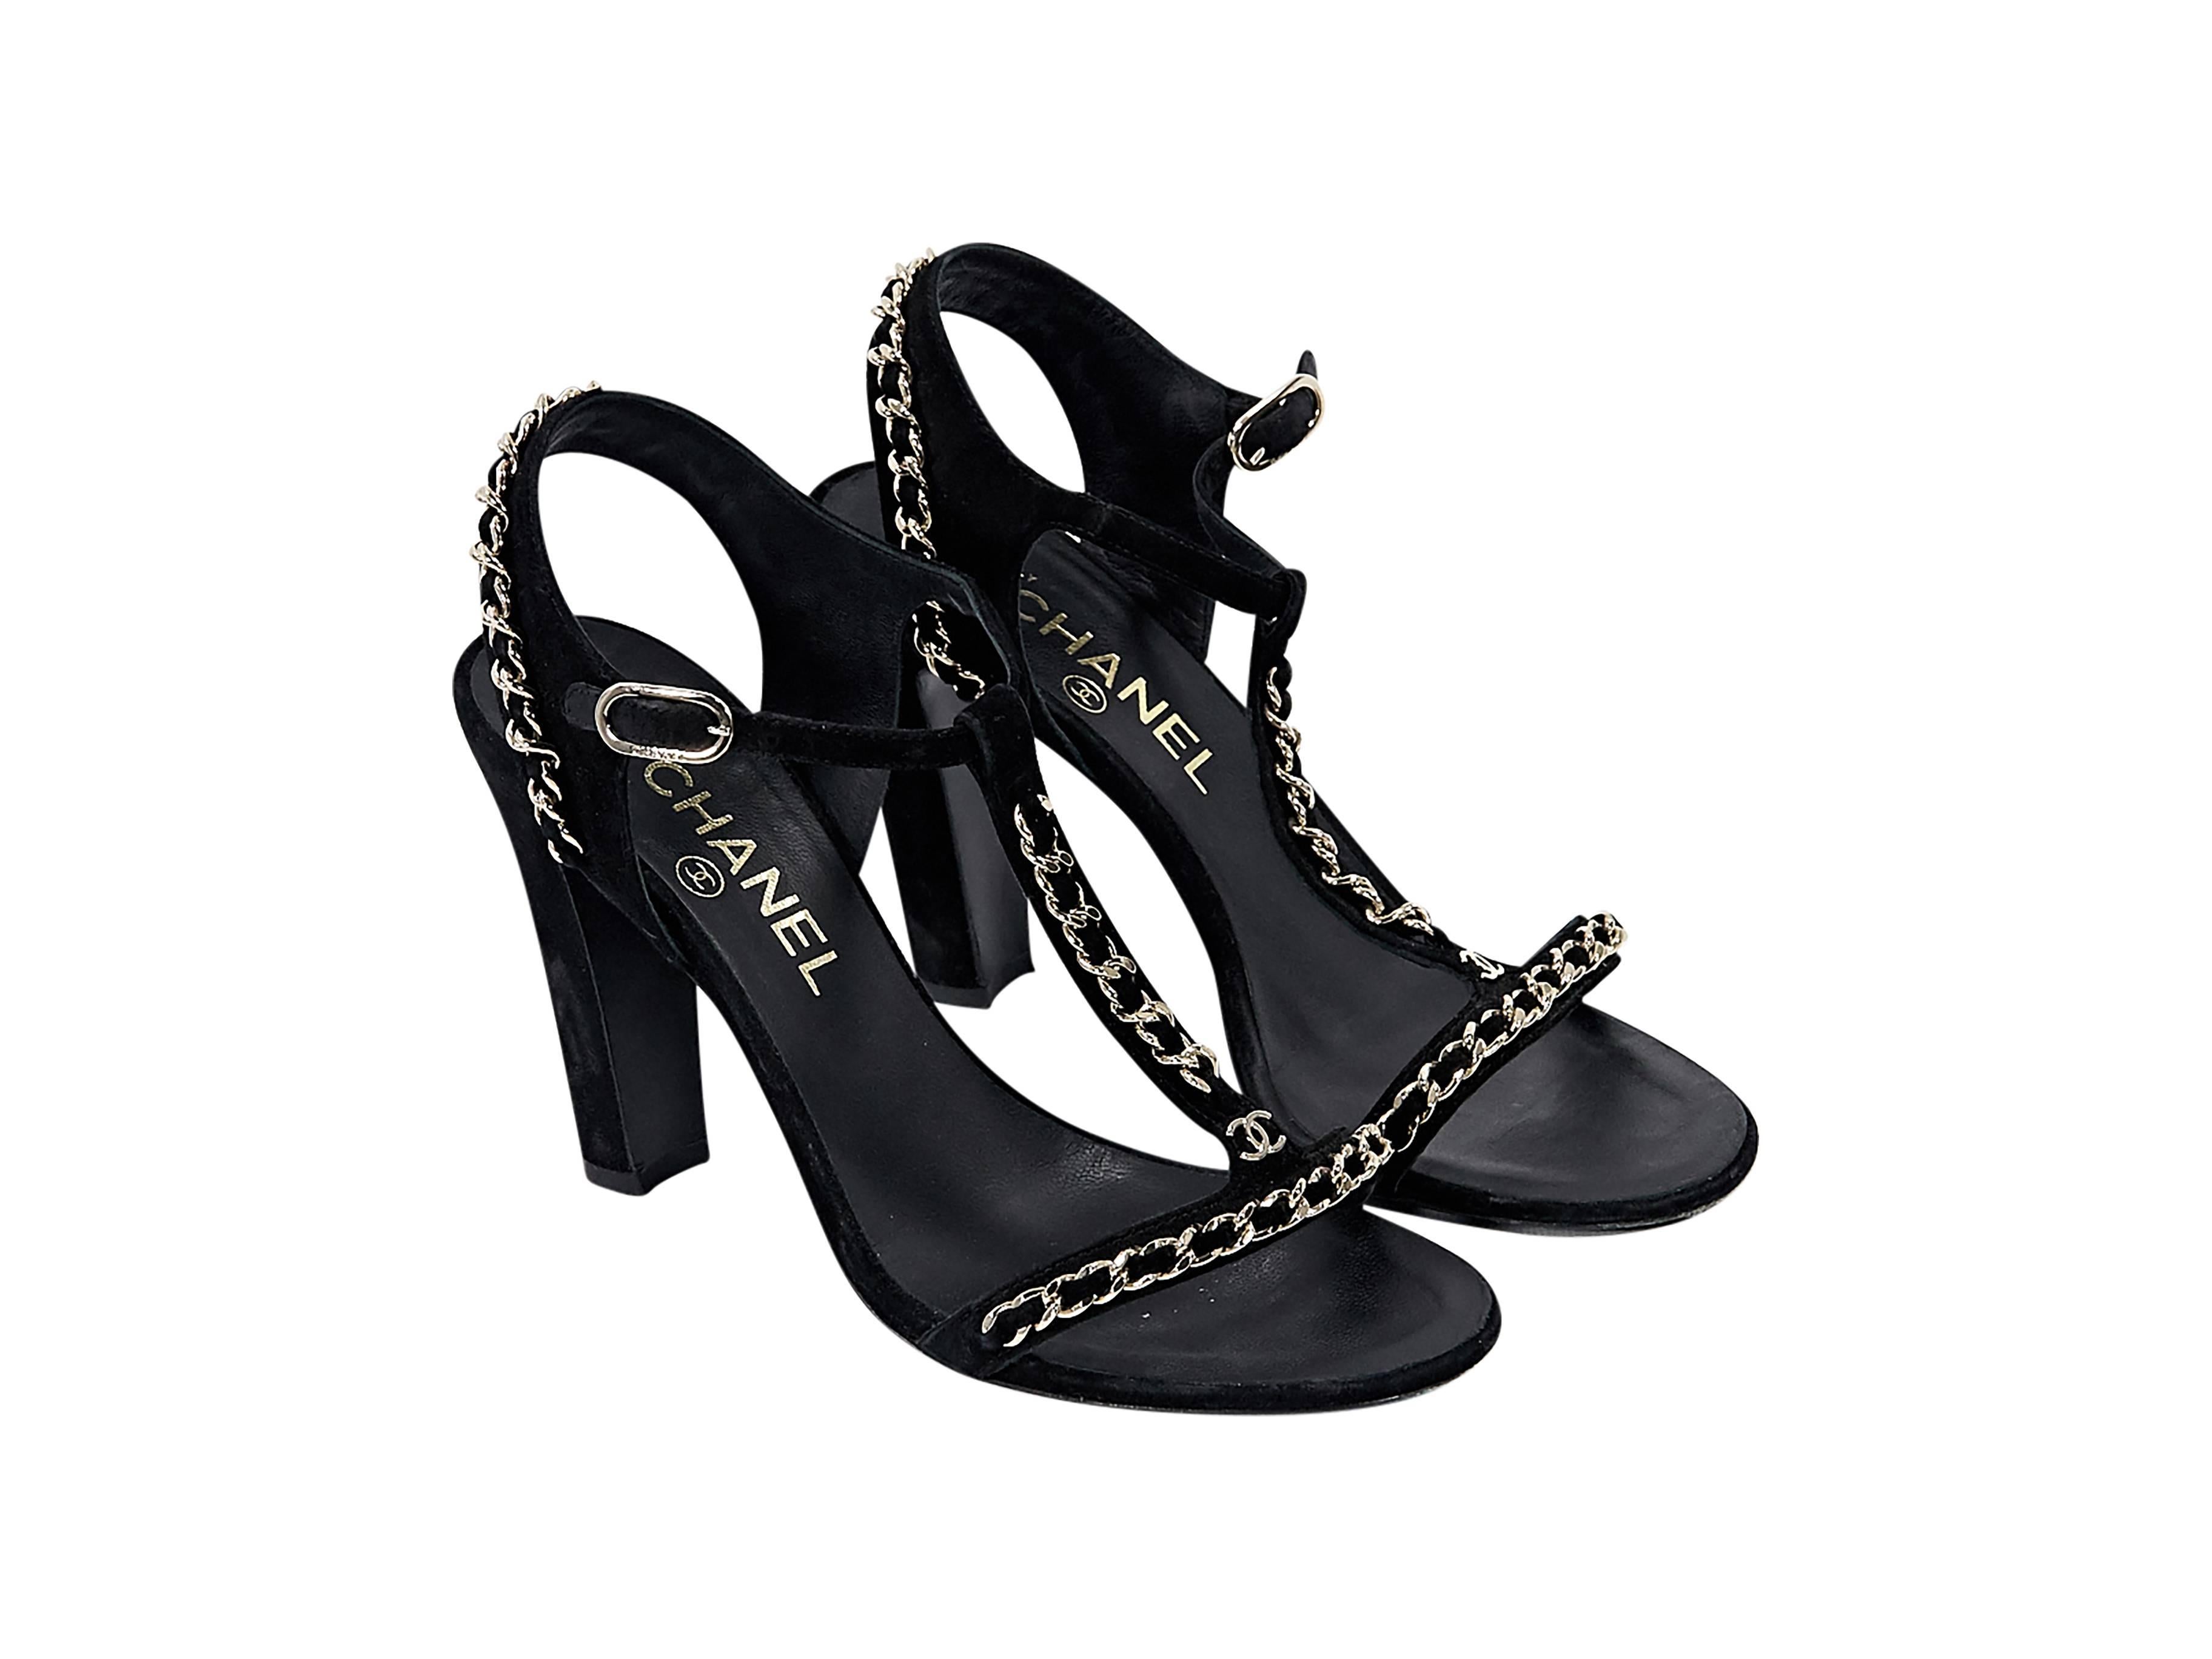 Product details: Black suede T-strap sandals by Chanel. Accented with chain details. Adjustable ankle strap. Open toe. Goldtone hardware.
Condition: Very good. 
Est. Retail $ 1,050.00